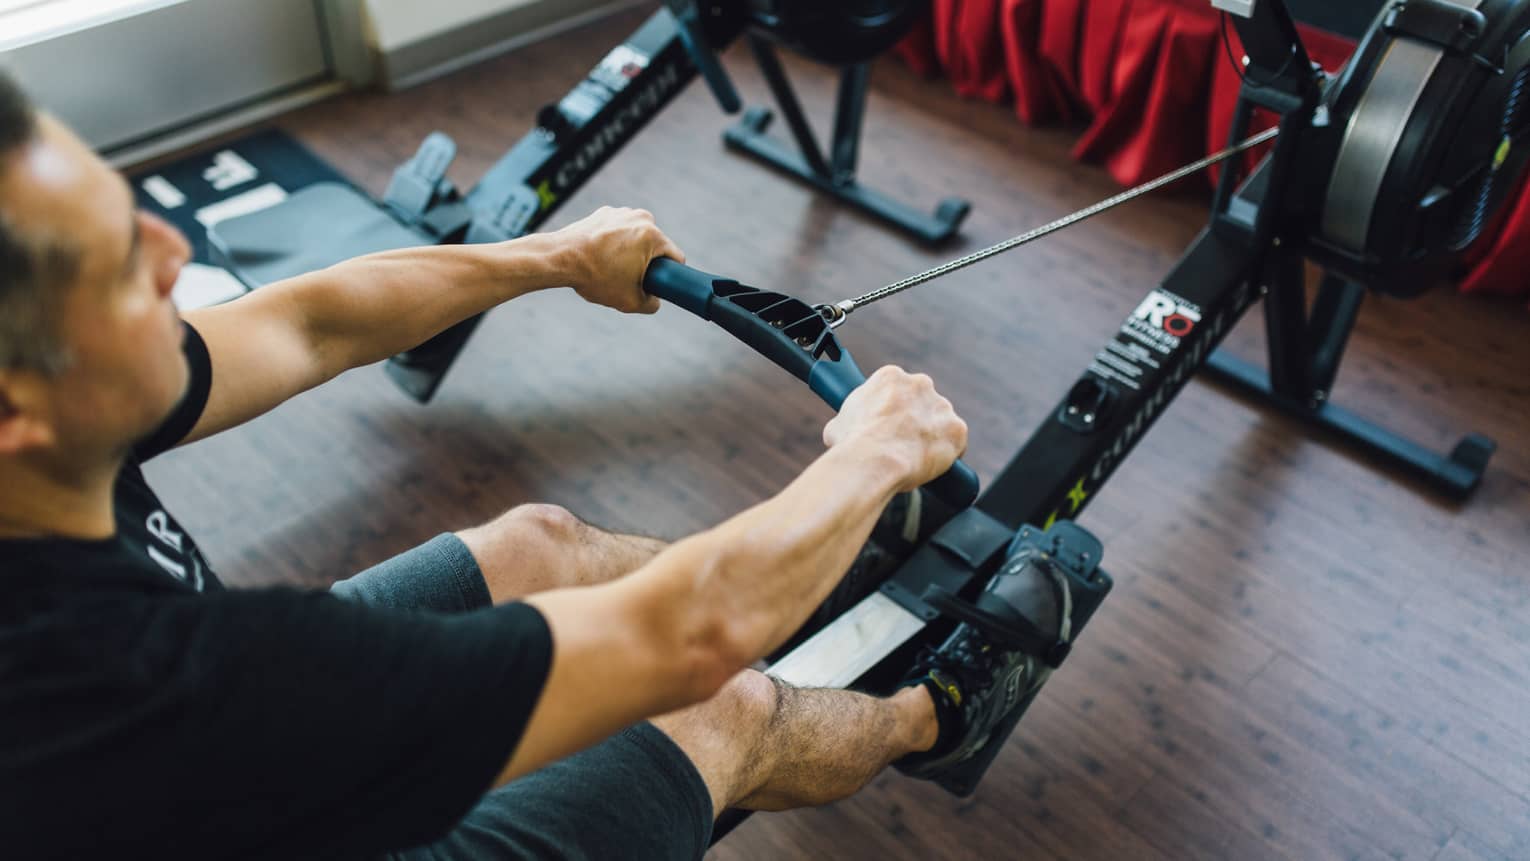 Man sits, pulls handle of cardio rowing machine in fitness facility